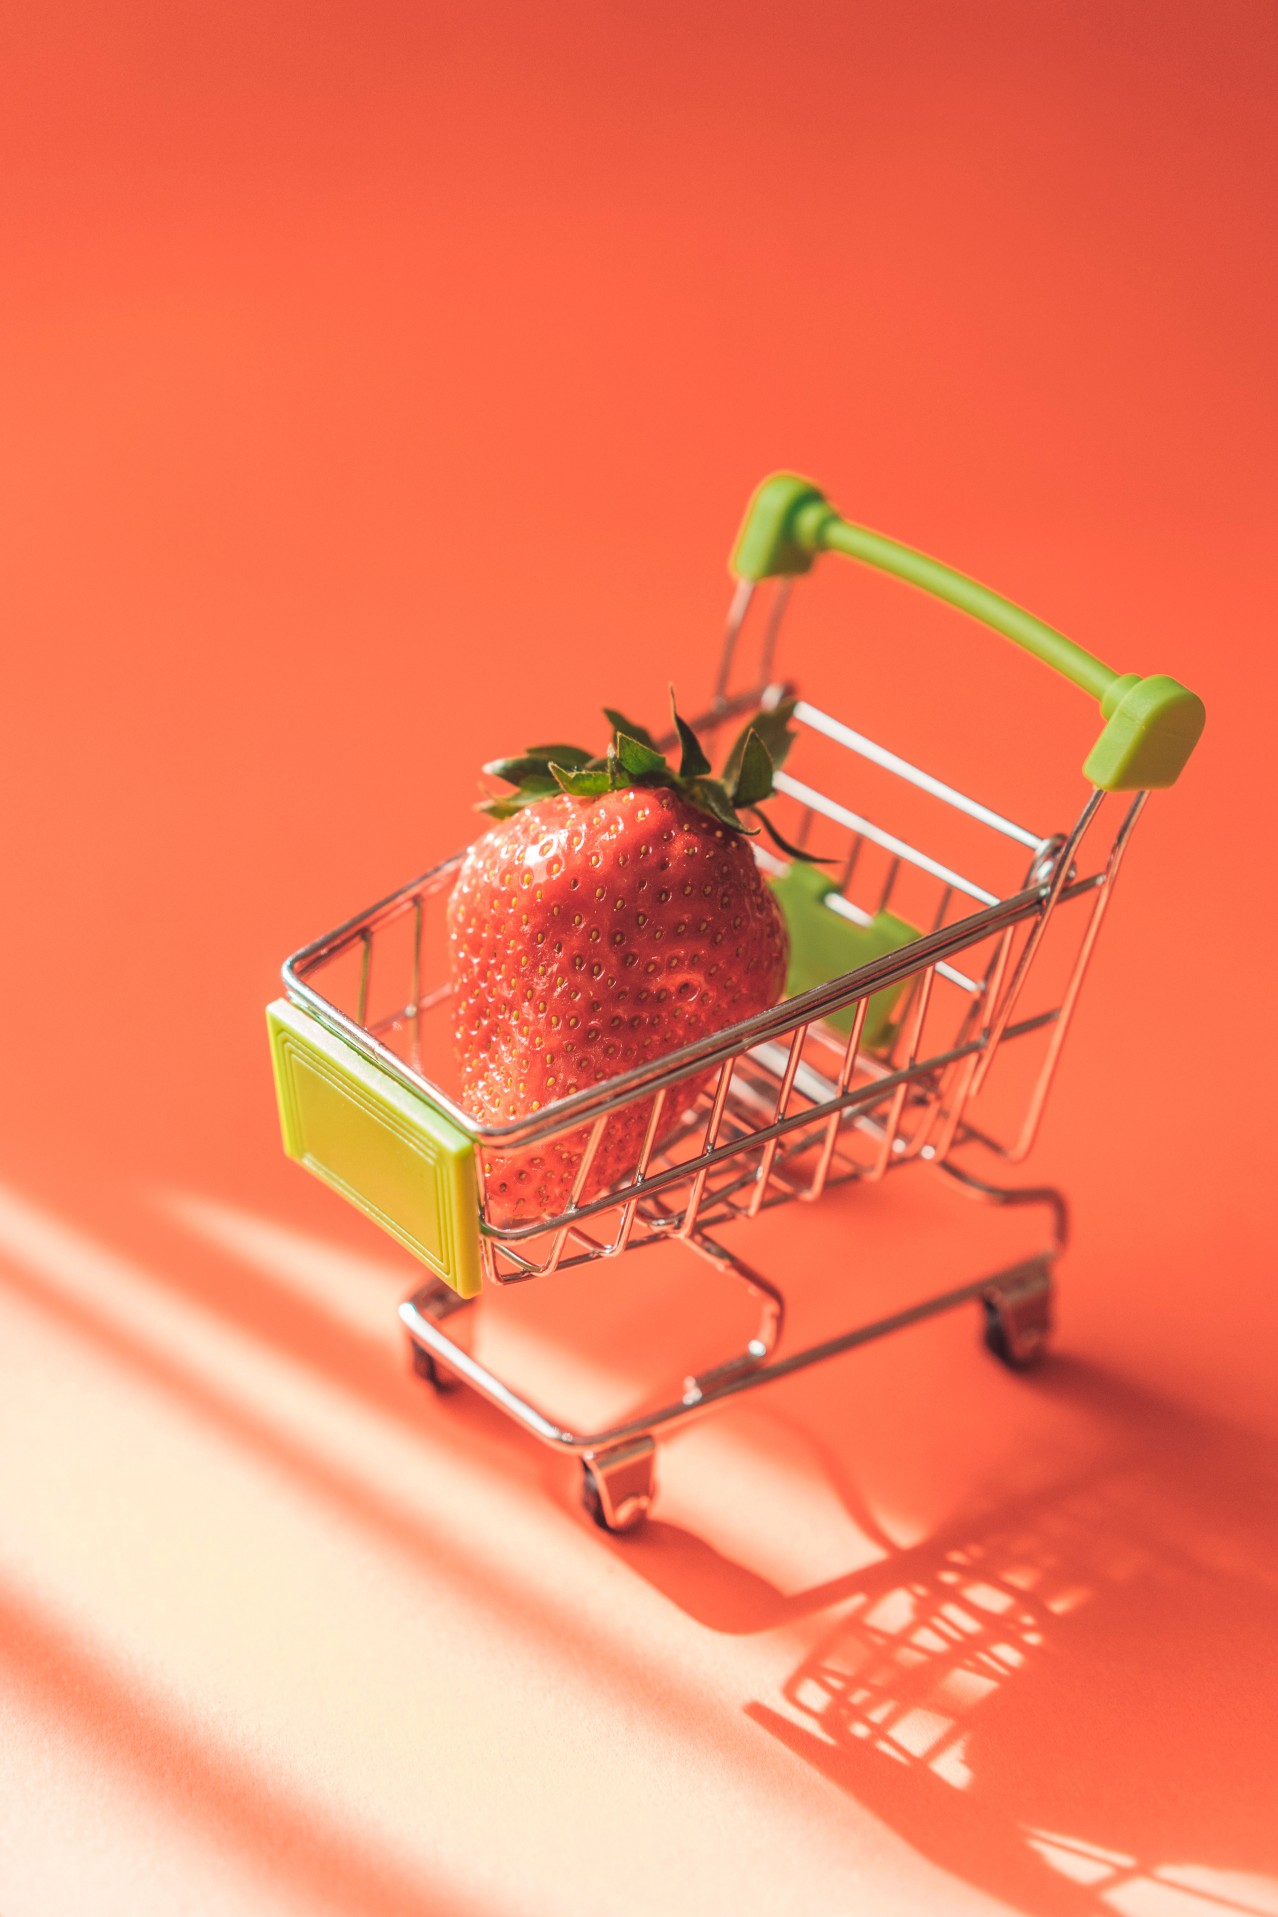 Strawberry in the shopping cart